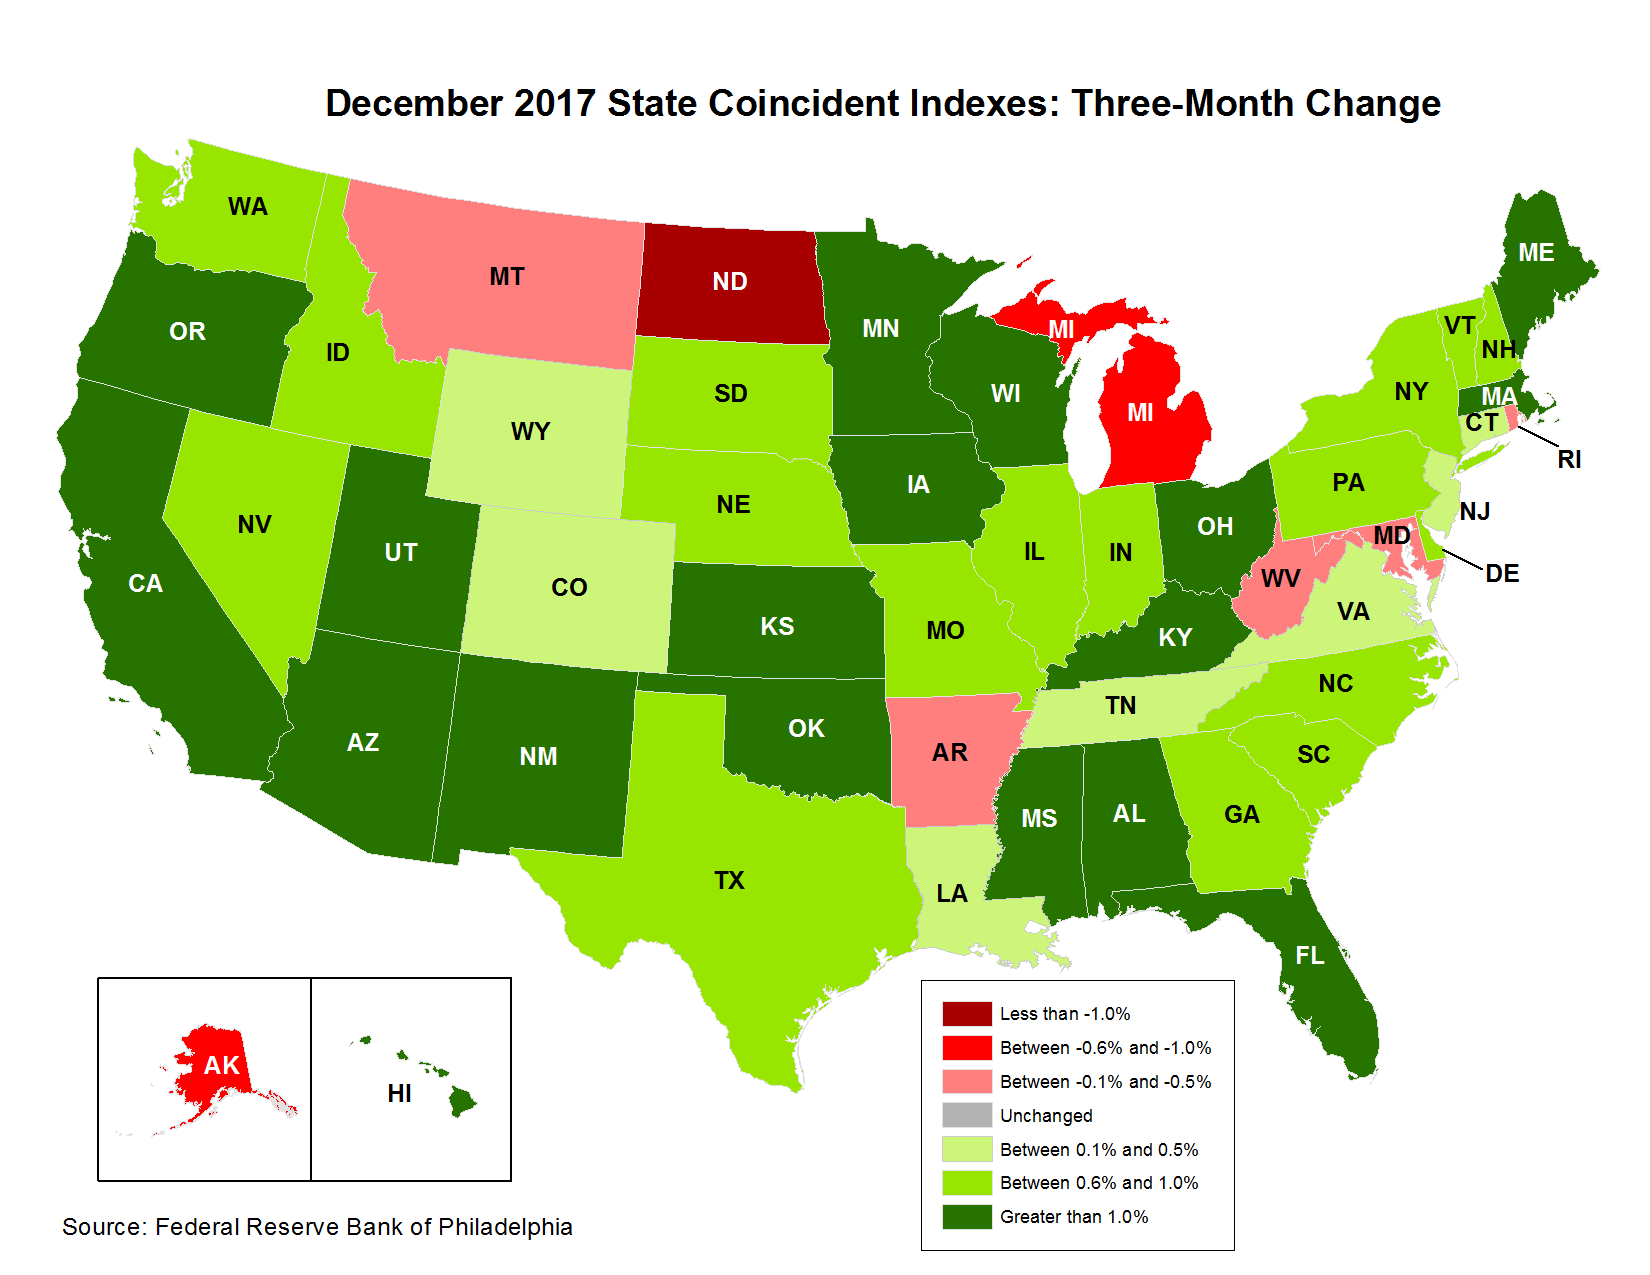 Map of the U.S. showing the State Coincident Indexes Three-Month Change in December 2017